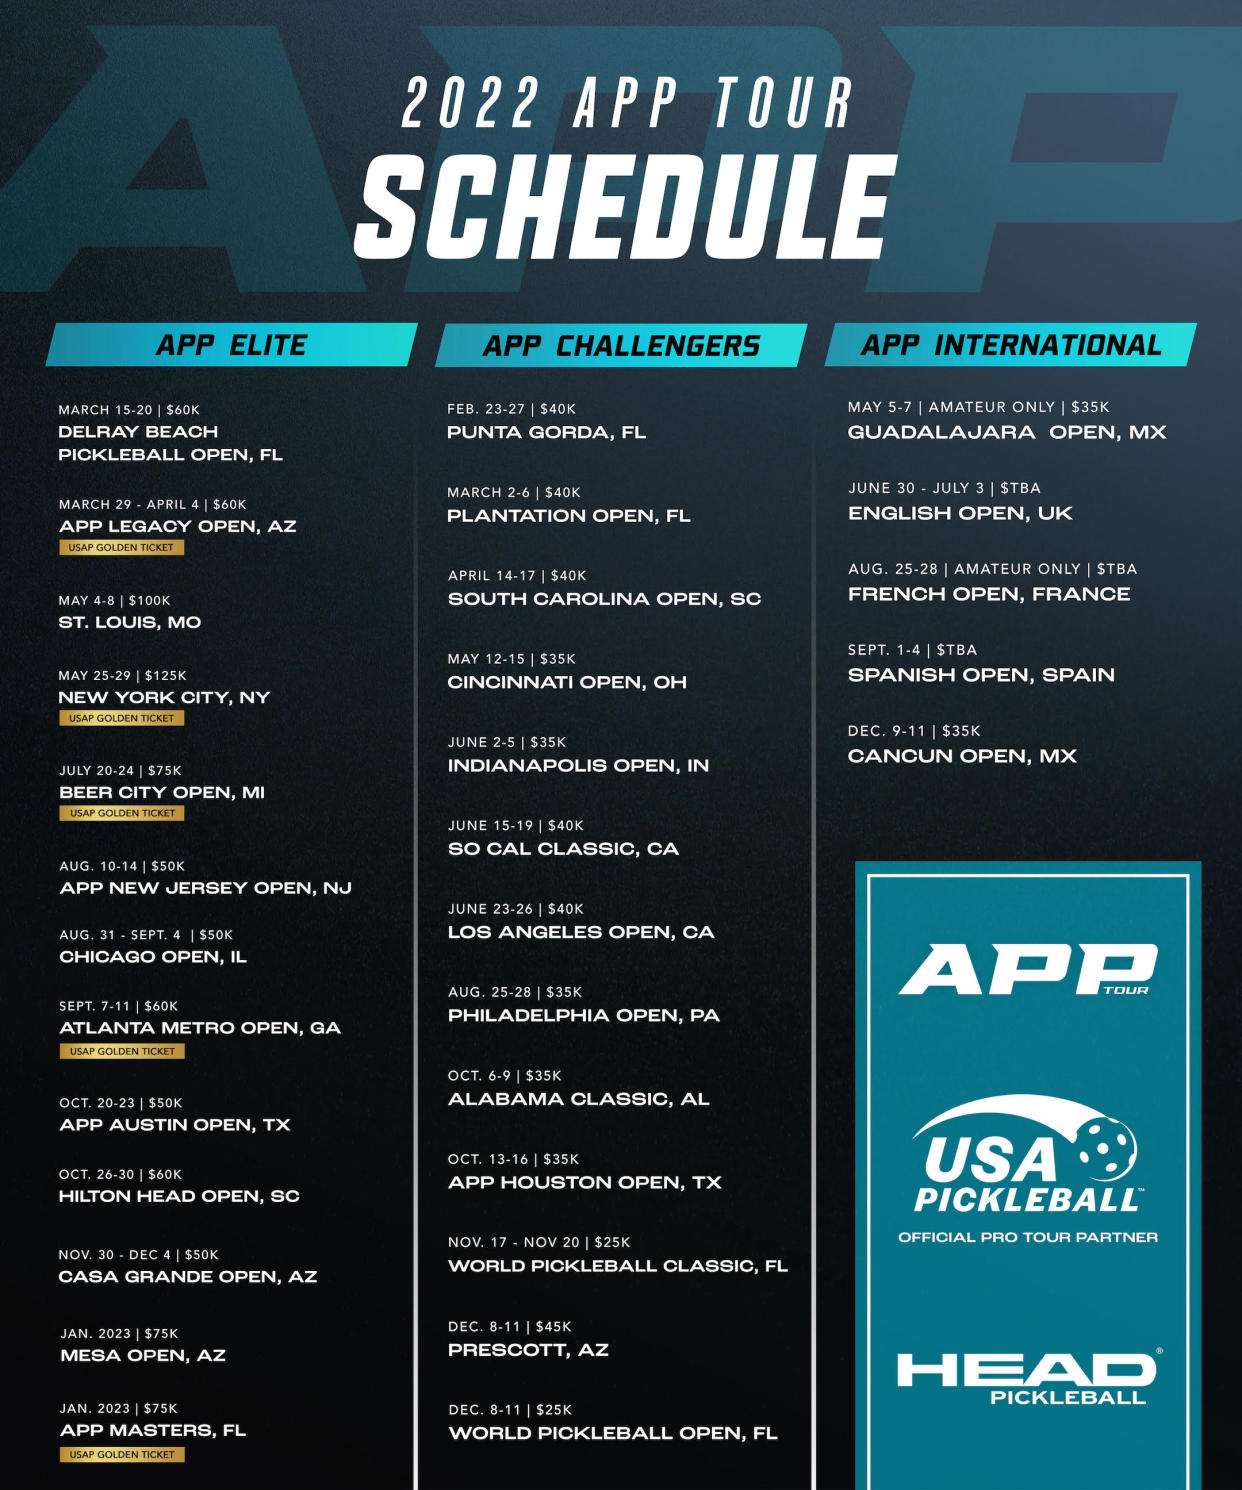 The official 2022 tour schedule for the Association of Pickleball Professionals.